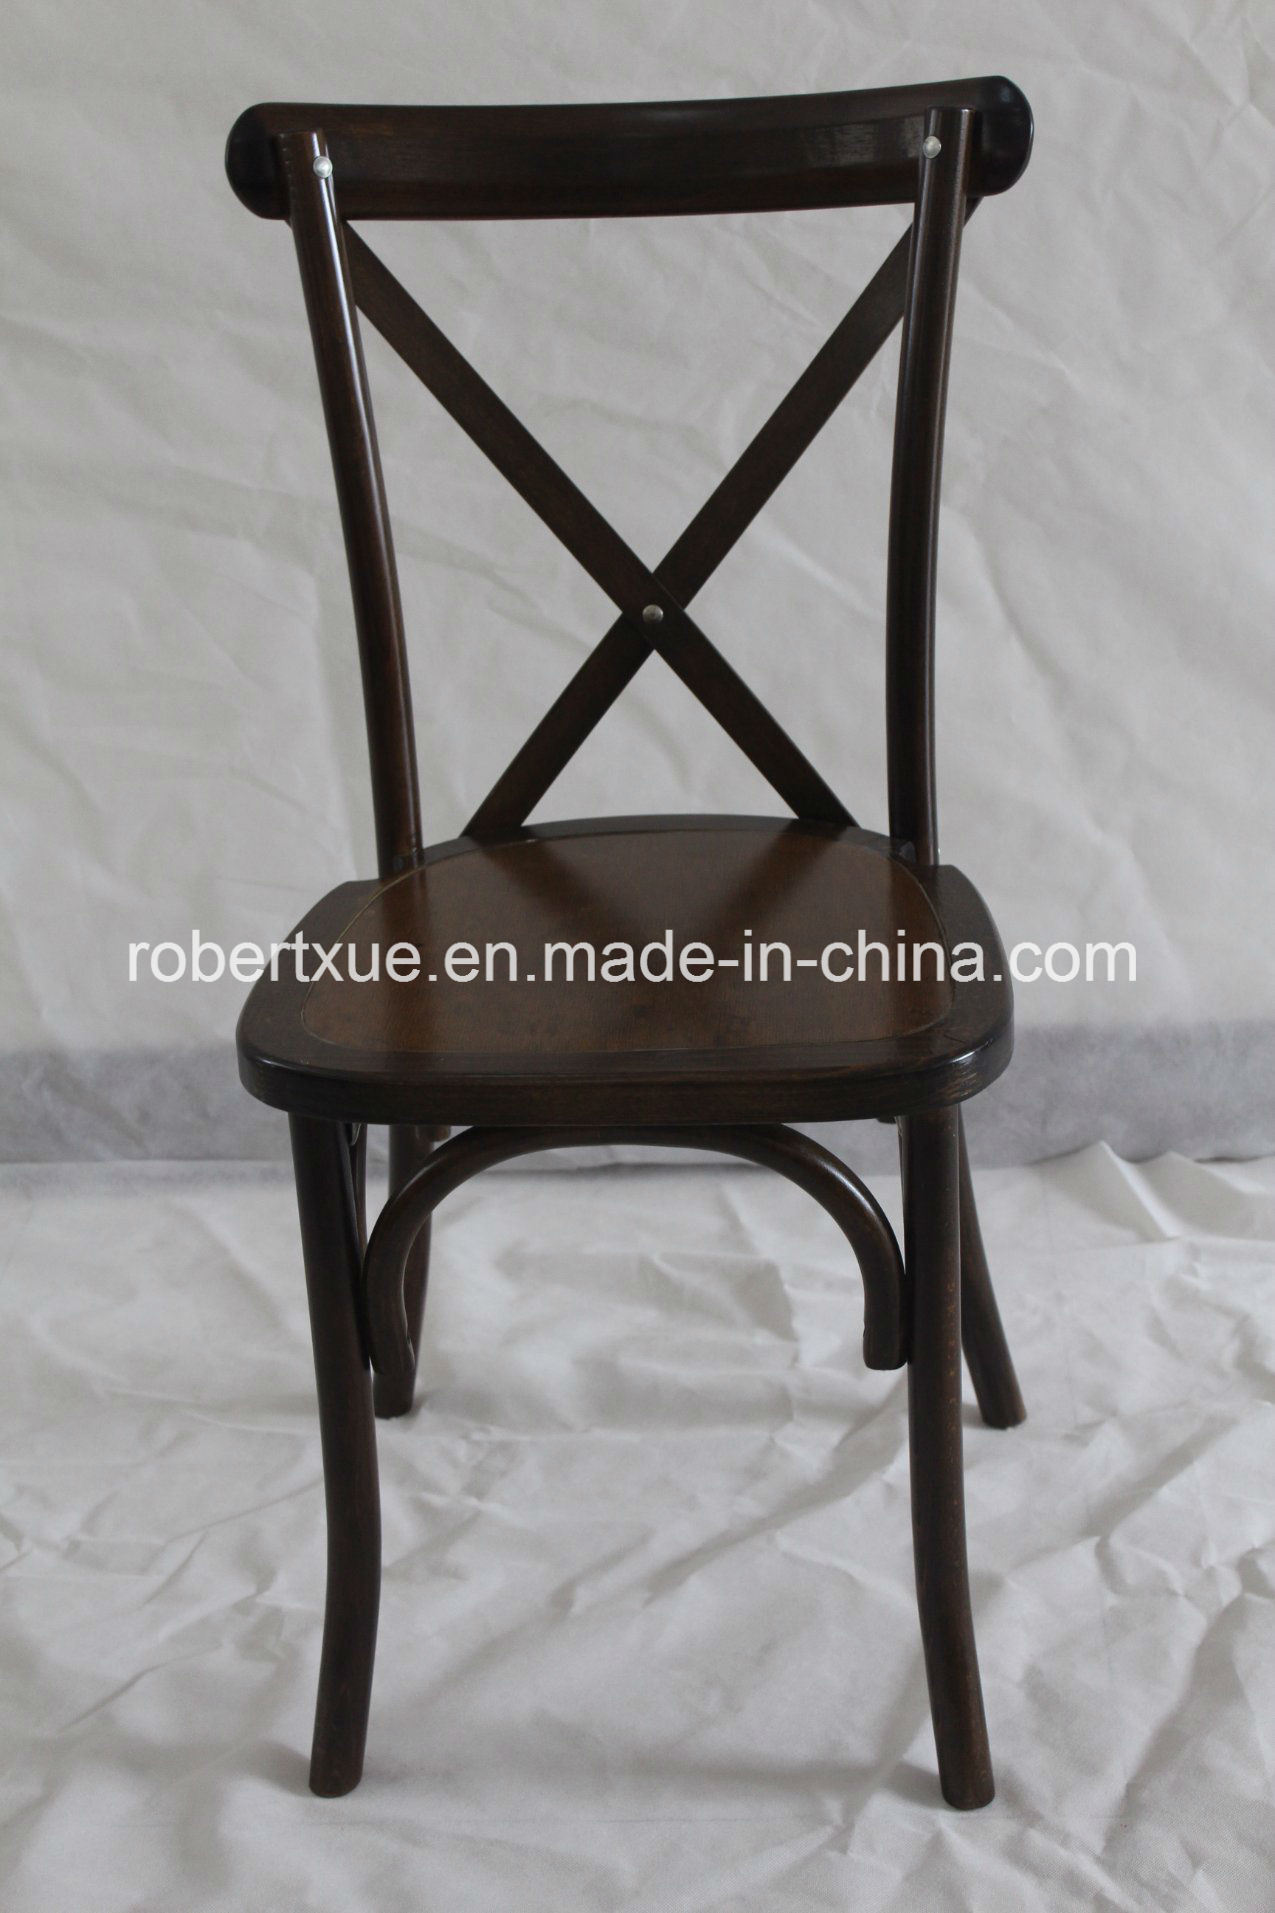 2017 Hot Sale Solid Wood Antique Classic X Cross Back Chair with Pillow or Cushion /Crossback Chair